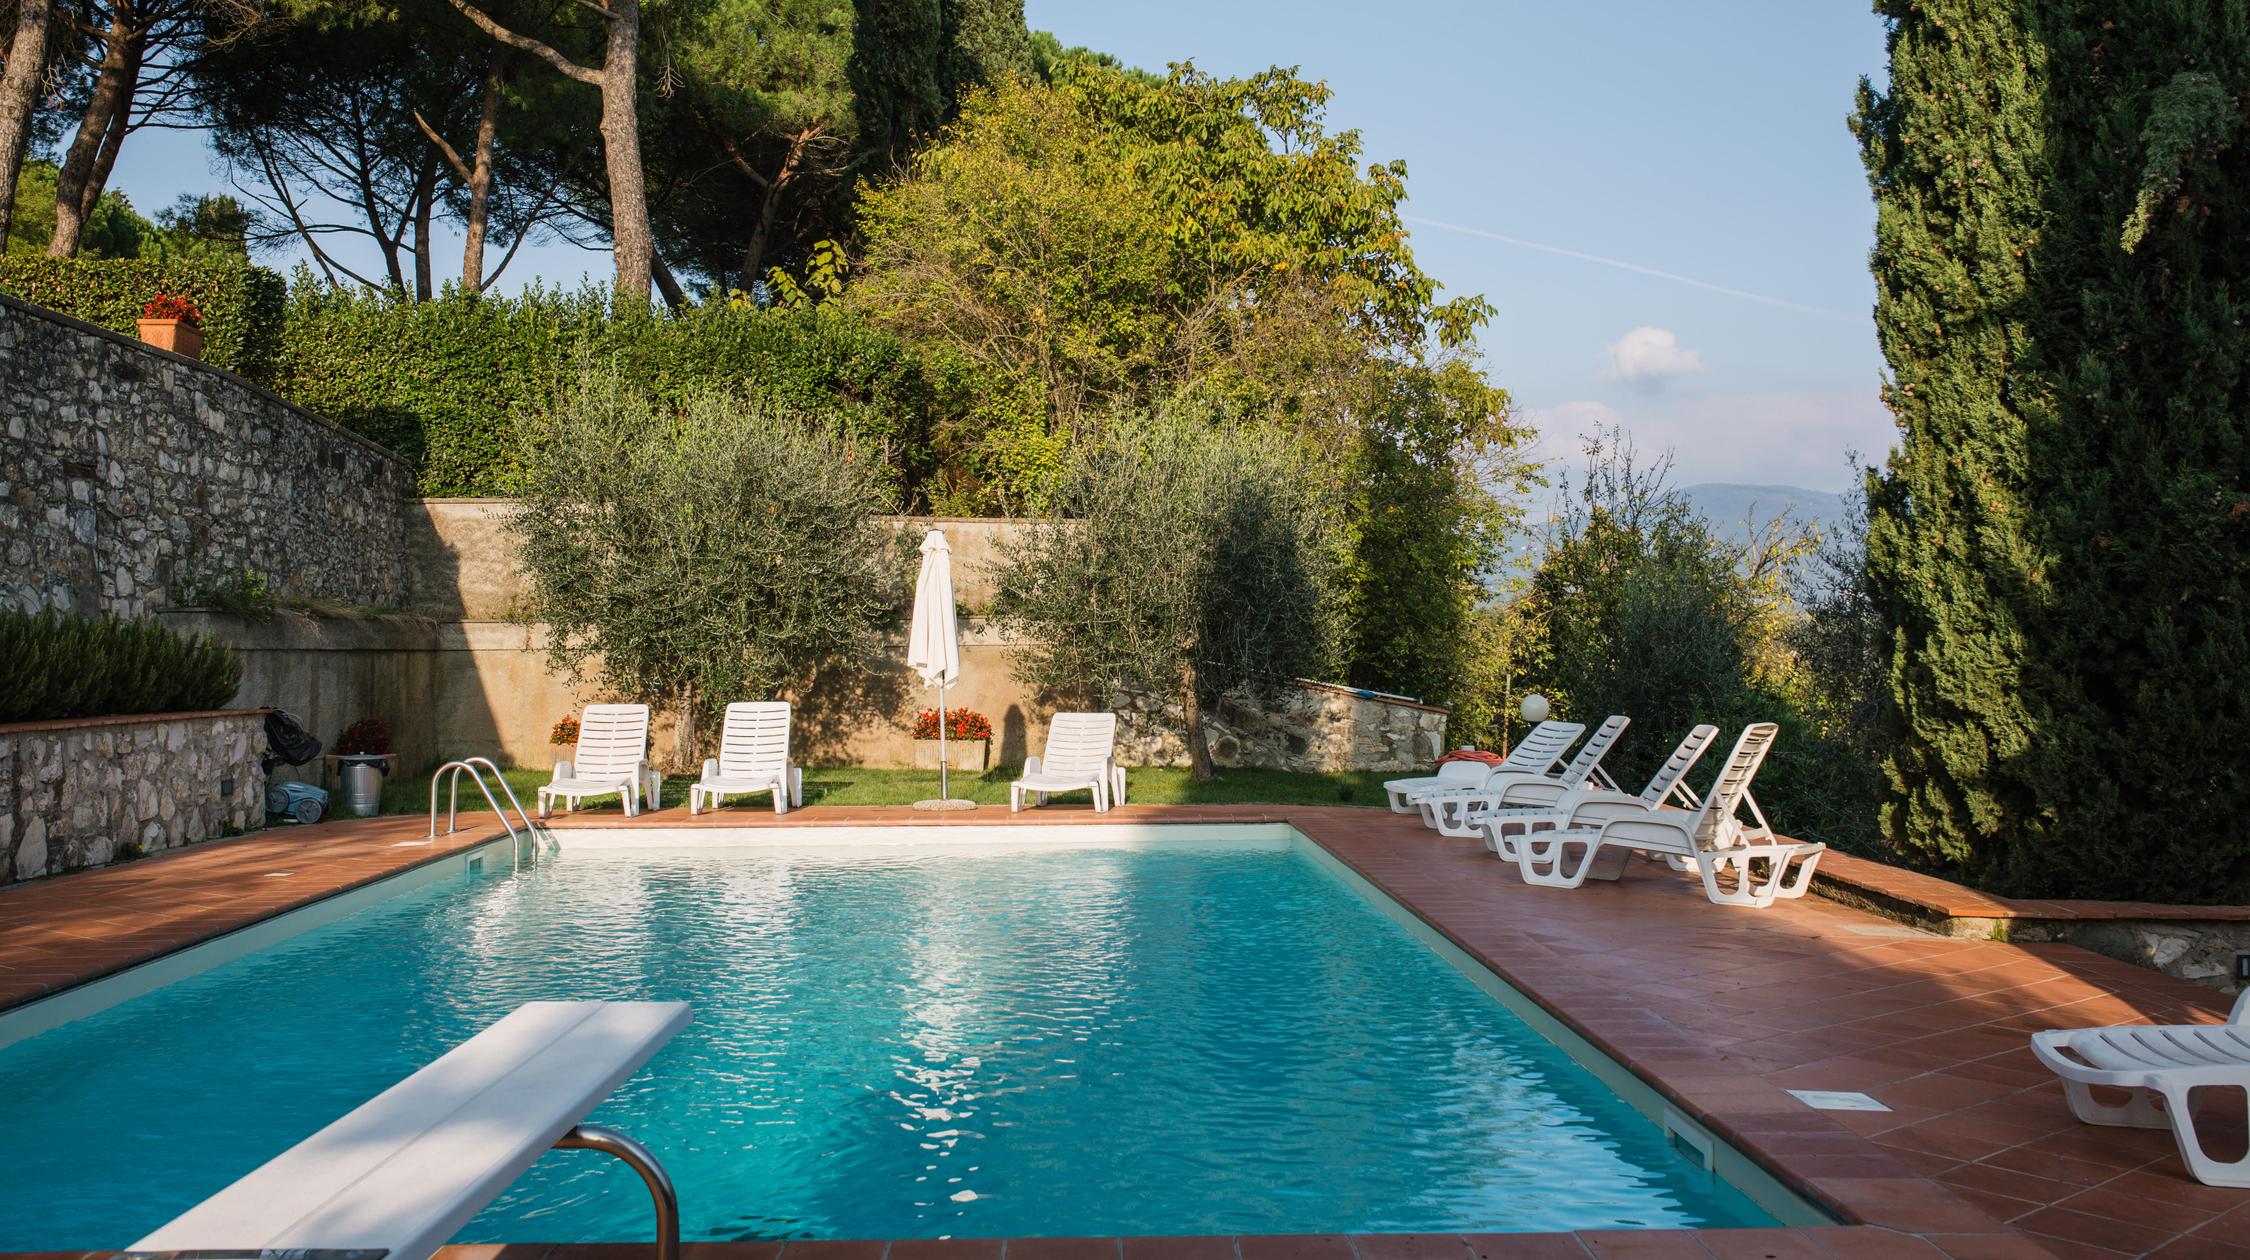 Bed & Breakfast in Chianti | Fattoria Pagnana, Rooms for holidays in Tuscany